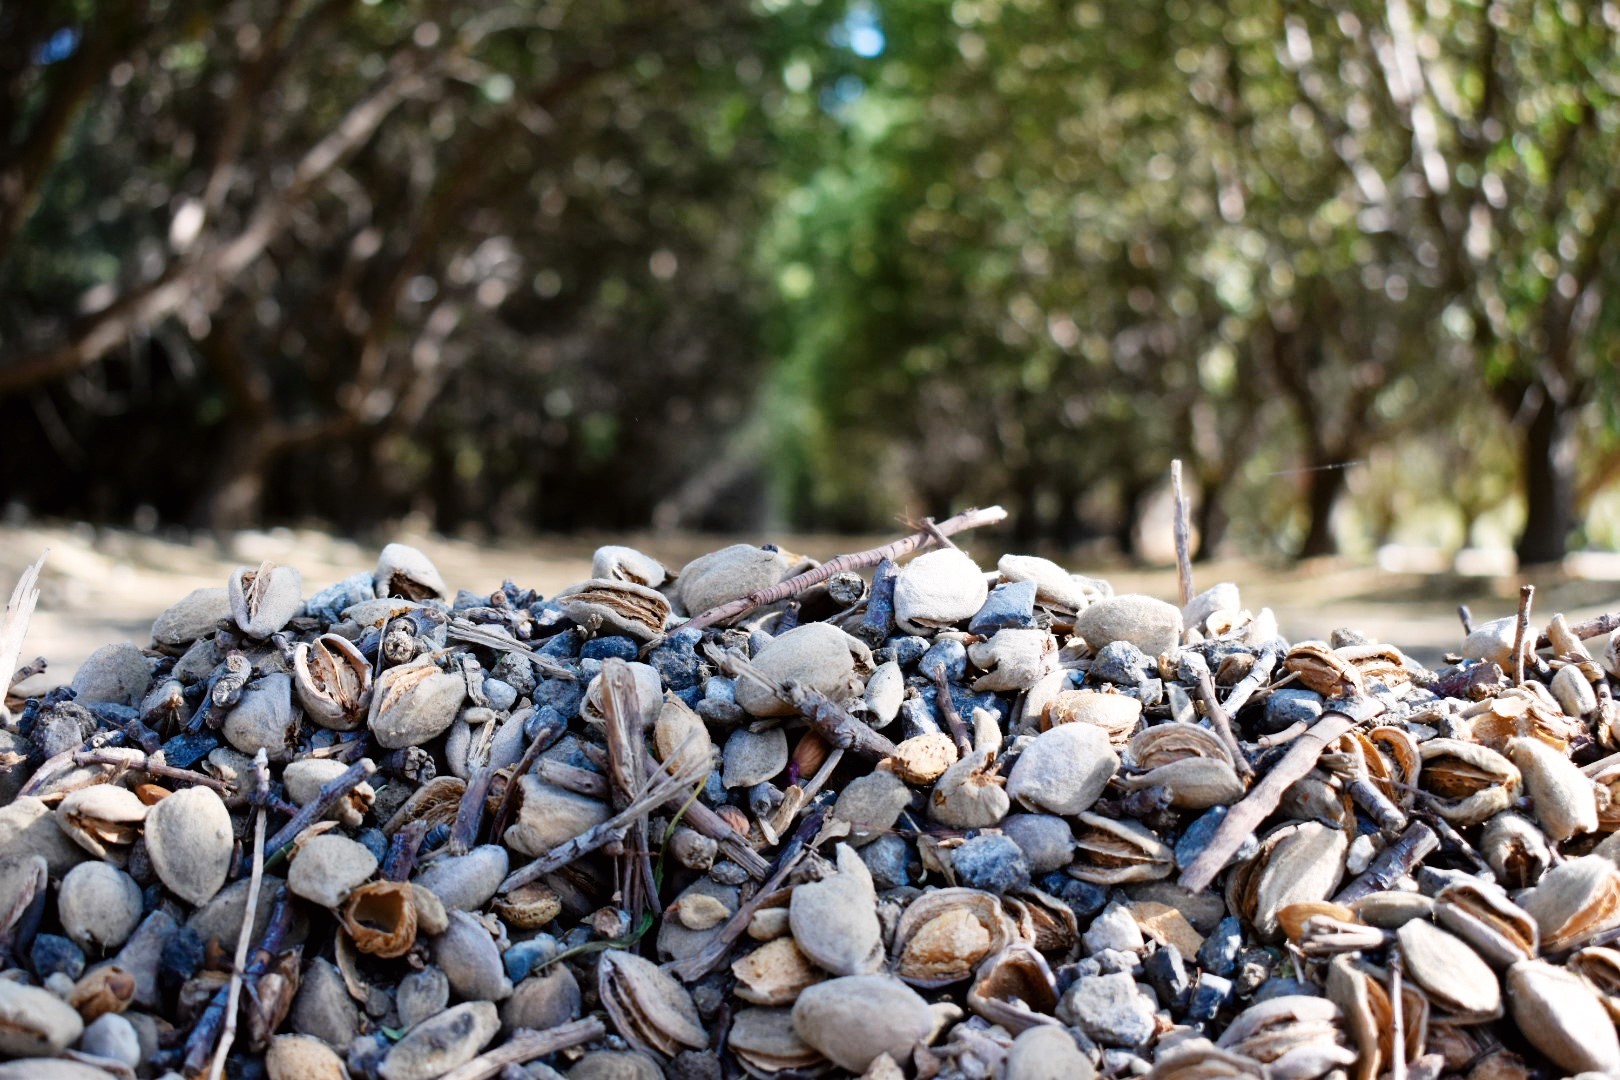 Almonds piled on the ground.